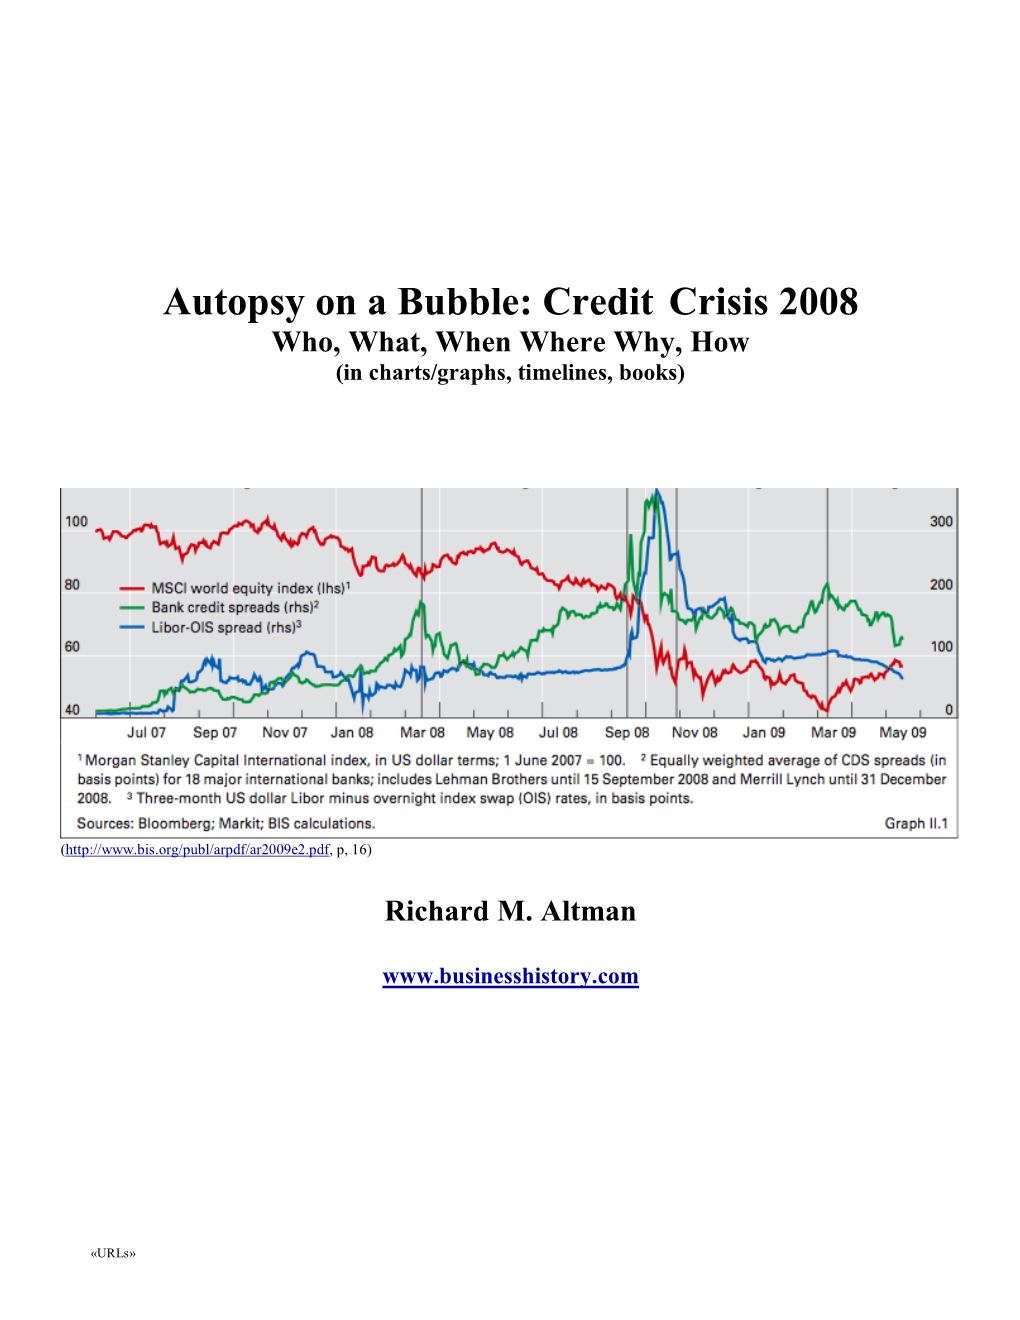 Autopsy on a Bubble: Credit Crisis 2008 Who, What, When Where Why, How (In Charts/Graphs, Timelines, Books)